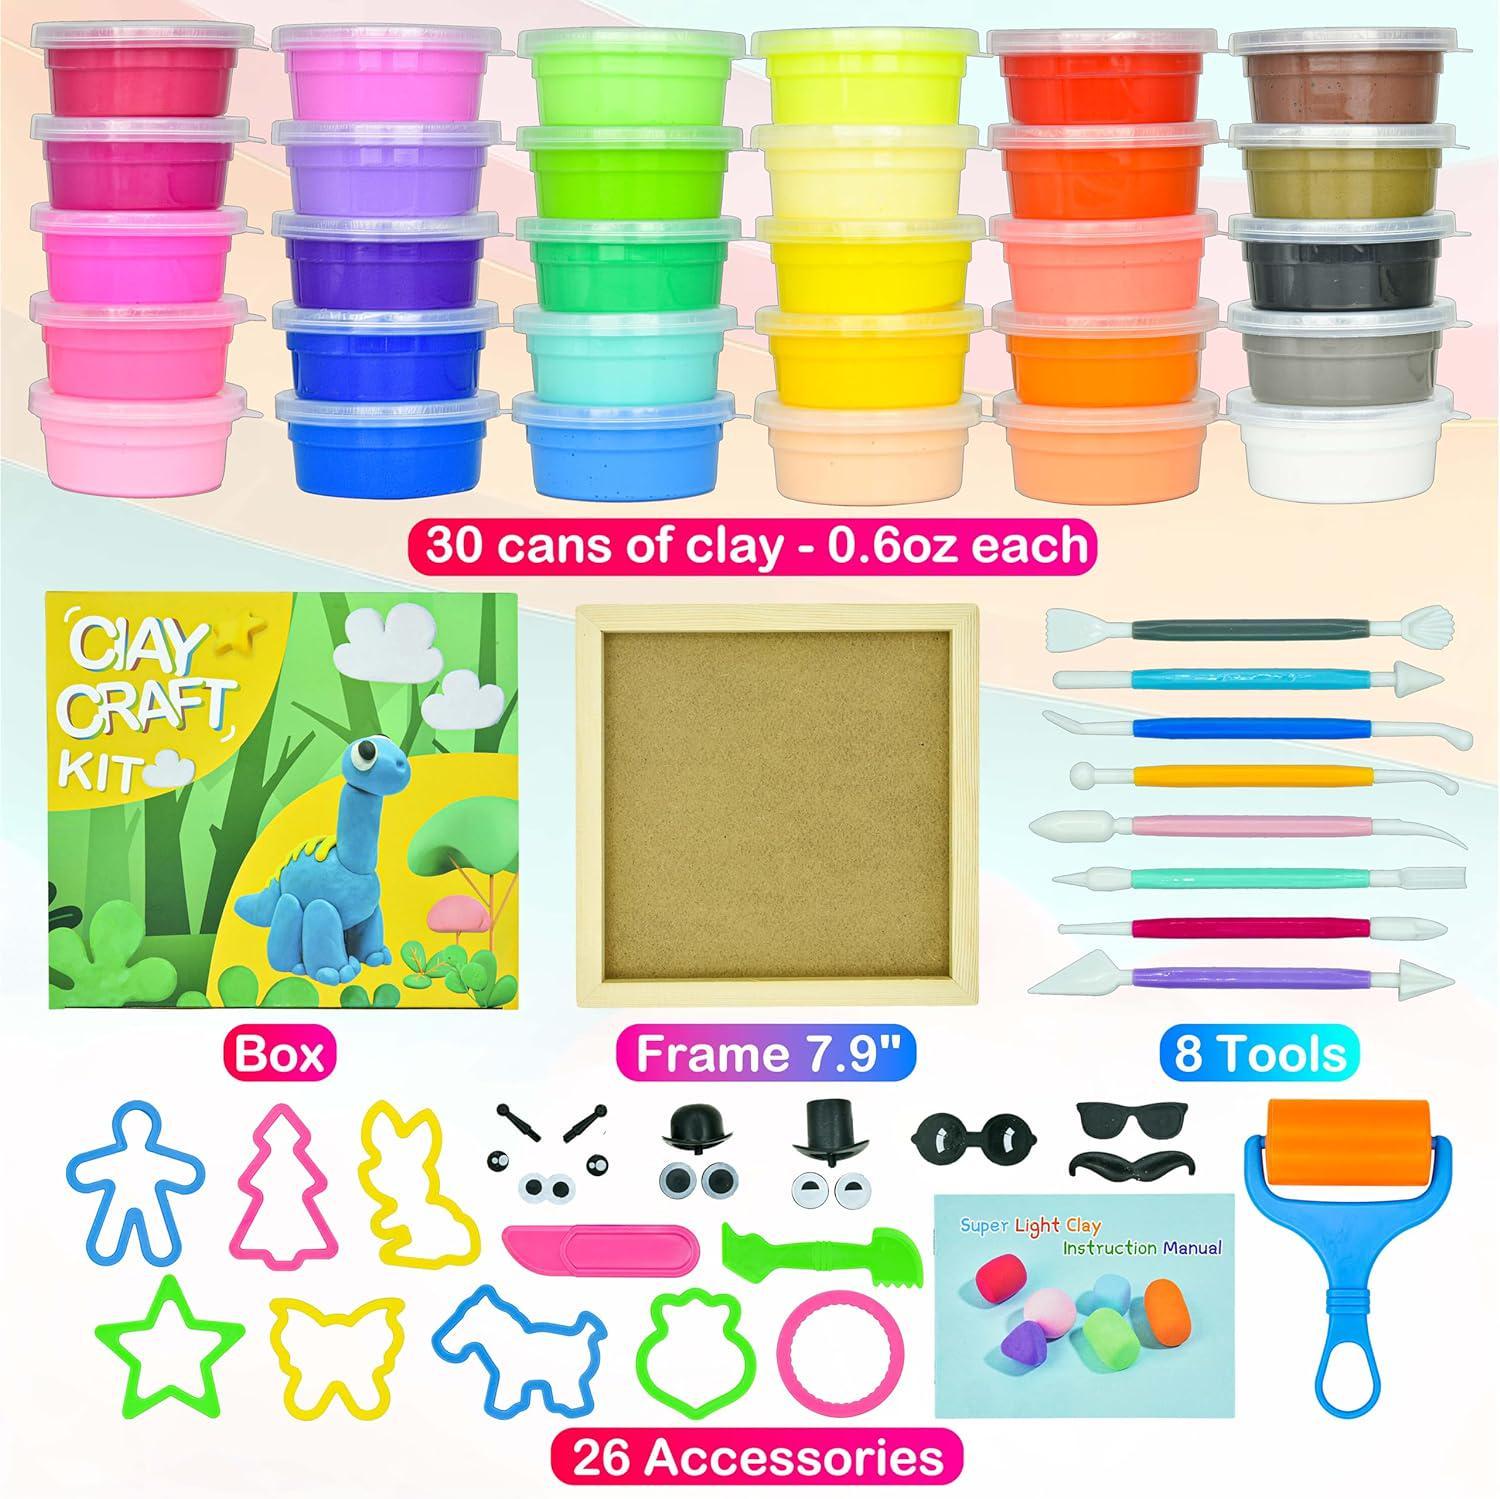  Air Dry Clay, 36 Colors Modeling Clay Kit with 3